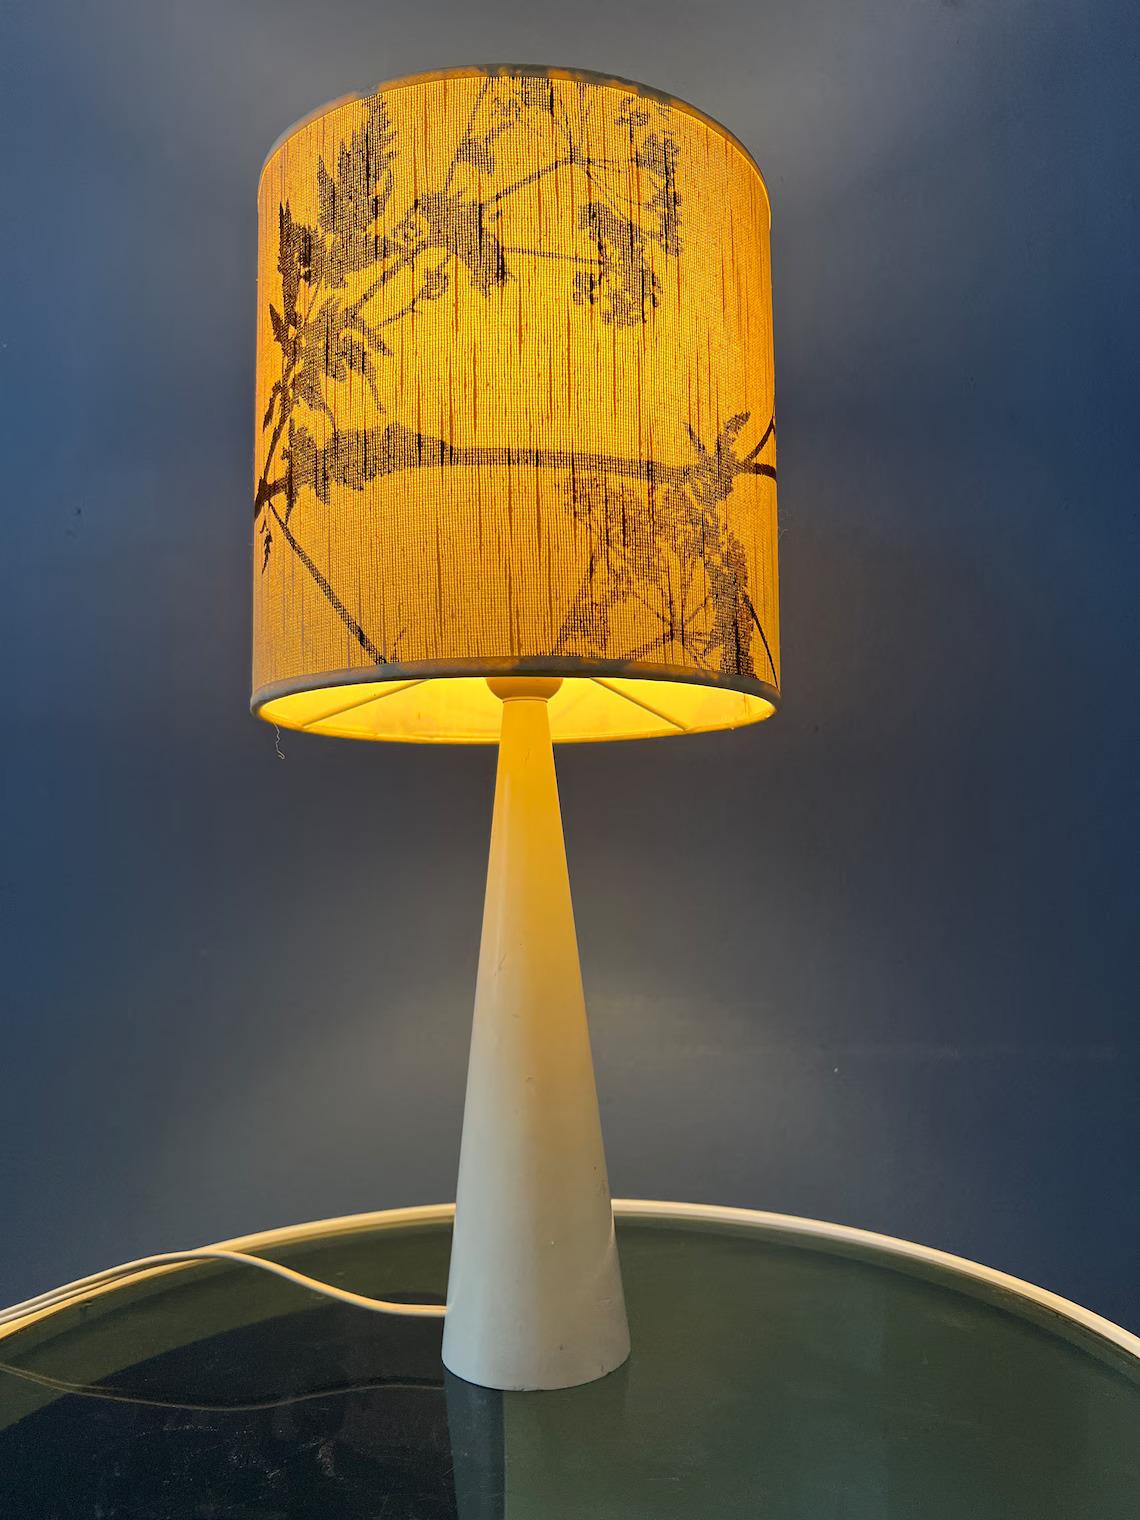 Elegant mid century table lamp with nicely decorated shade. The flower shade diffuses the light in a gentle and inviting manner, casting a warm and soothing ambiance. The lamp requires one E27/26 lightbulb and currently has an EU-plug (easily usable